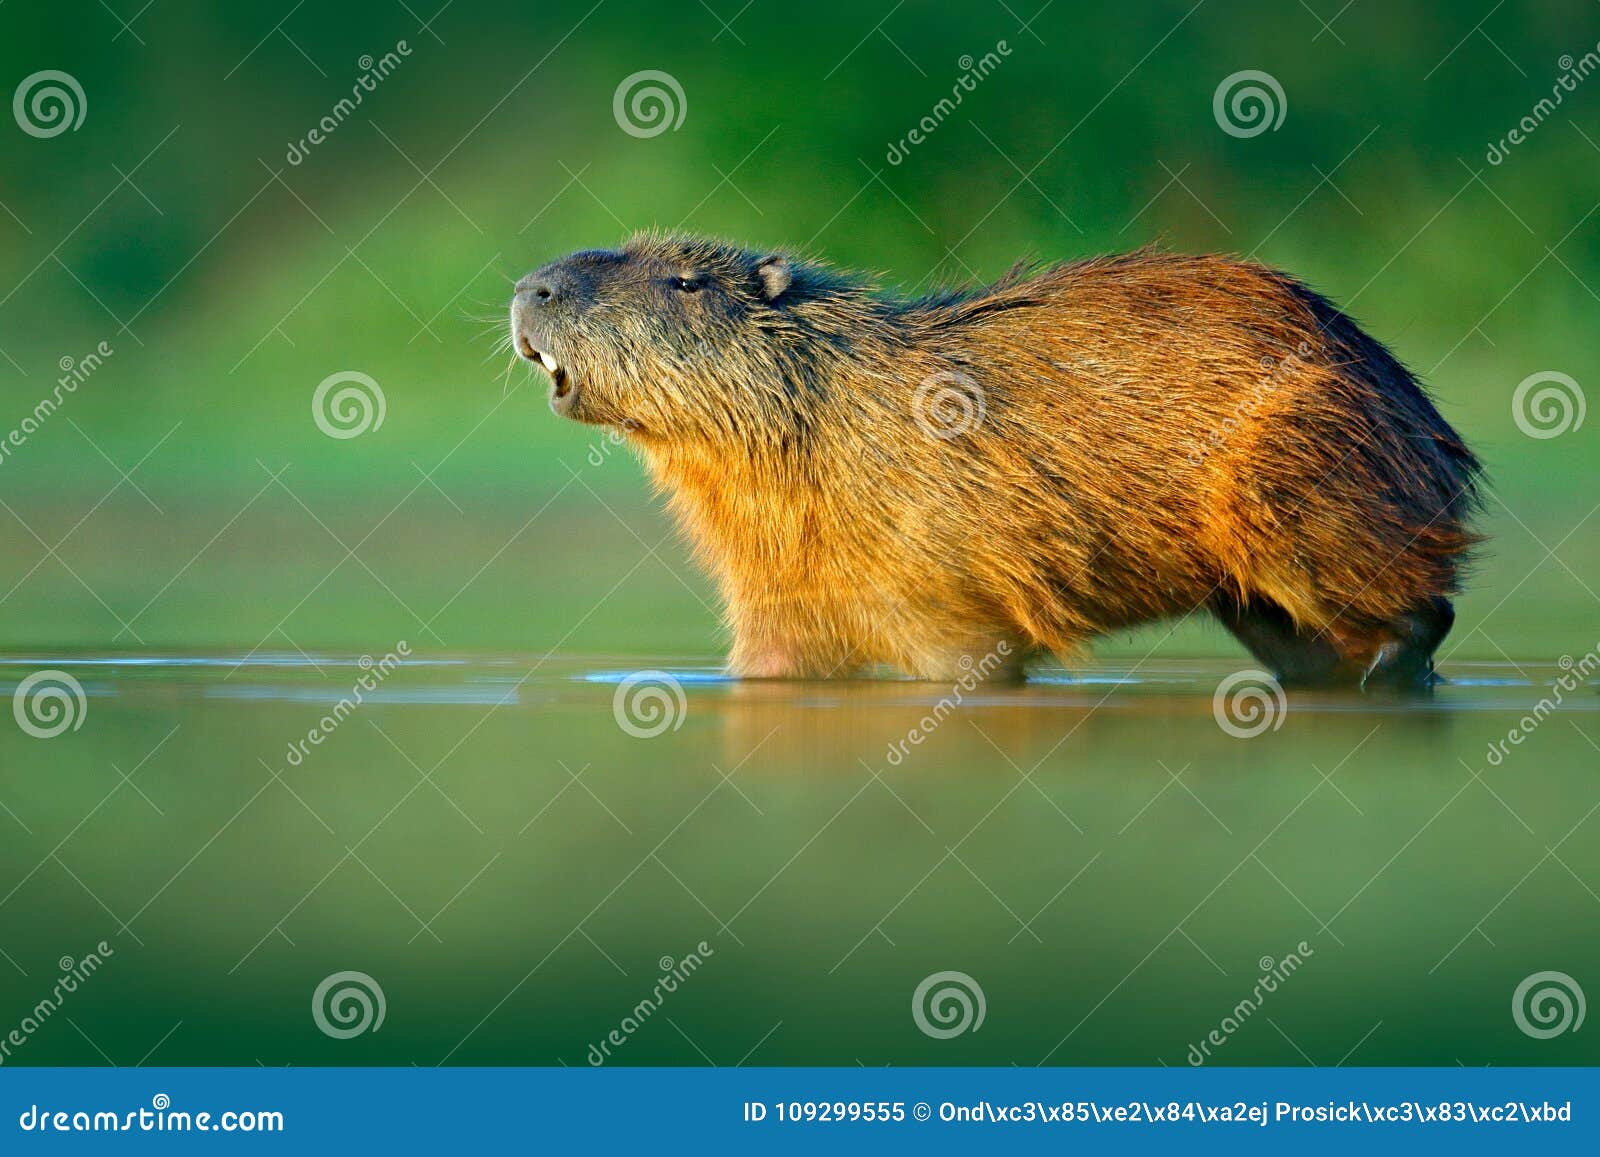 capybara, hydrochoerus hydrochaeris, biggest mouse in water with evening light during sunset, pantanal, brazil. wildlife scene fro